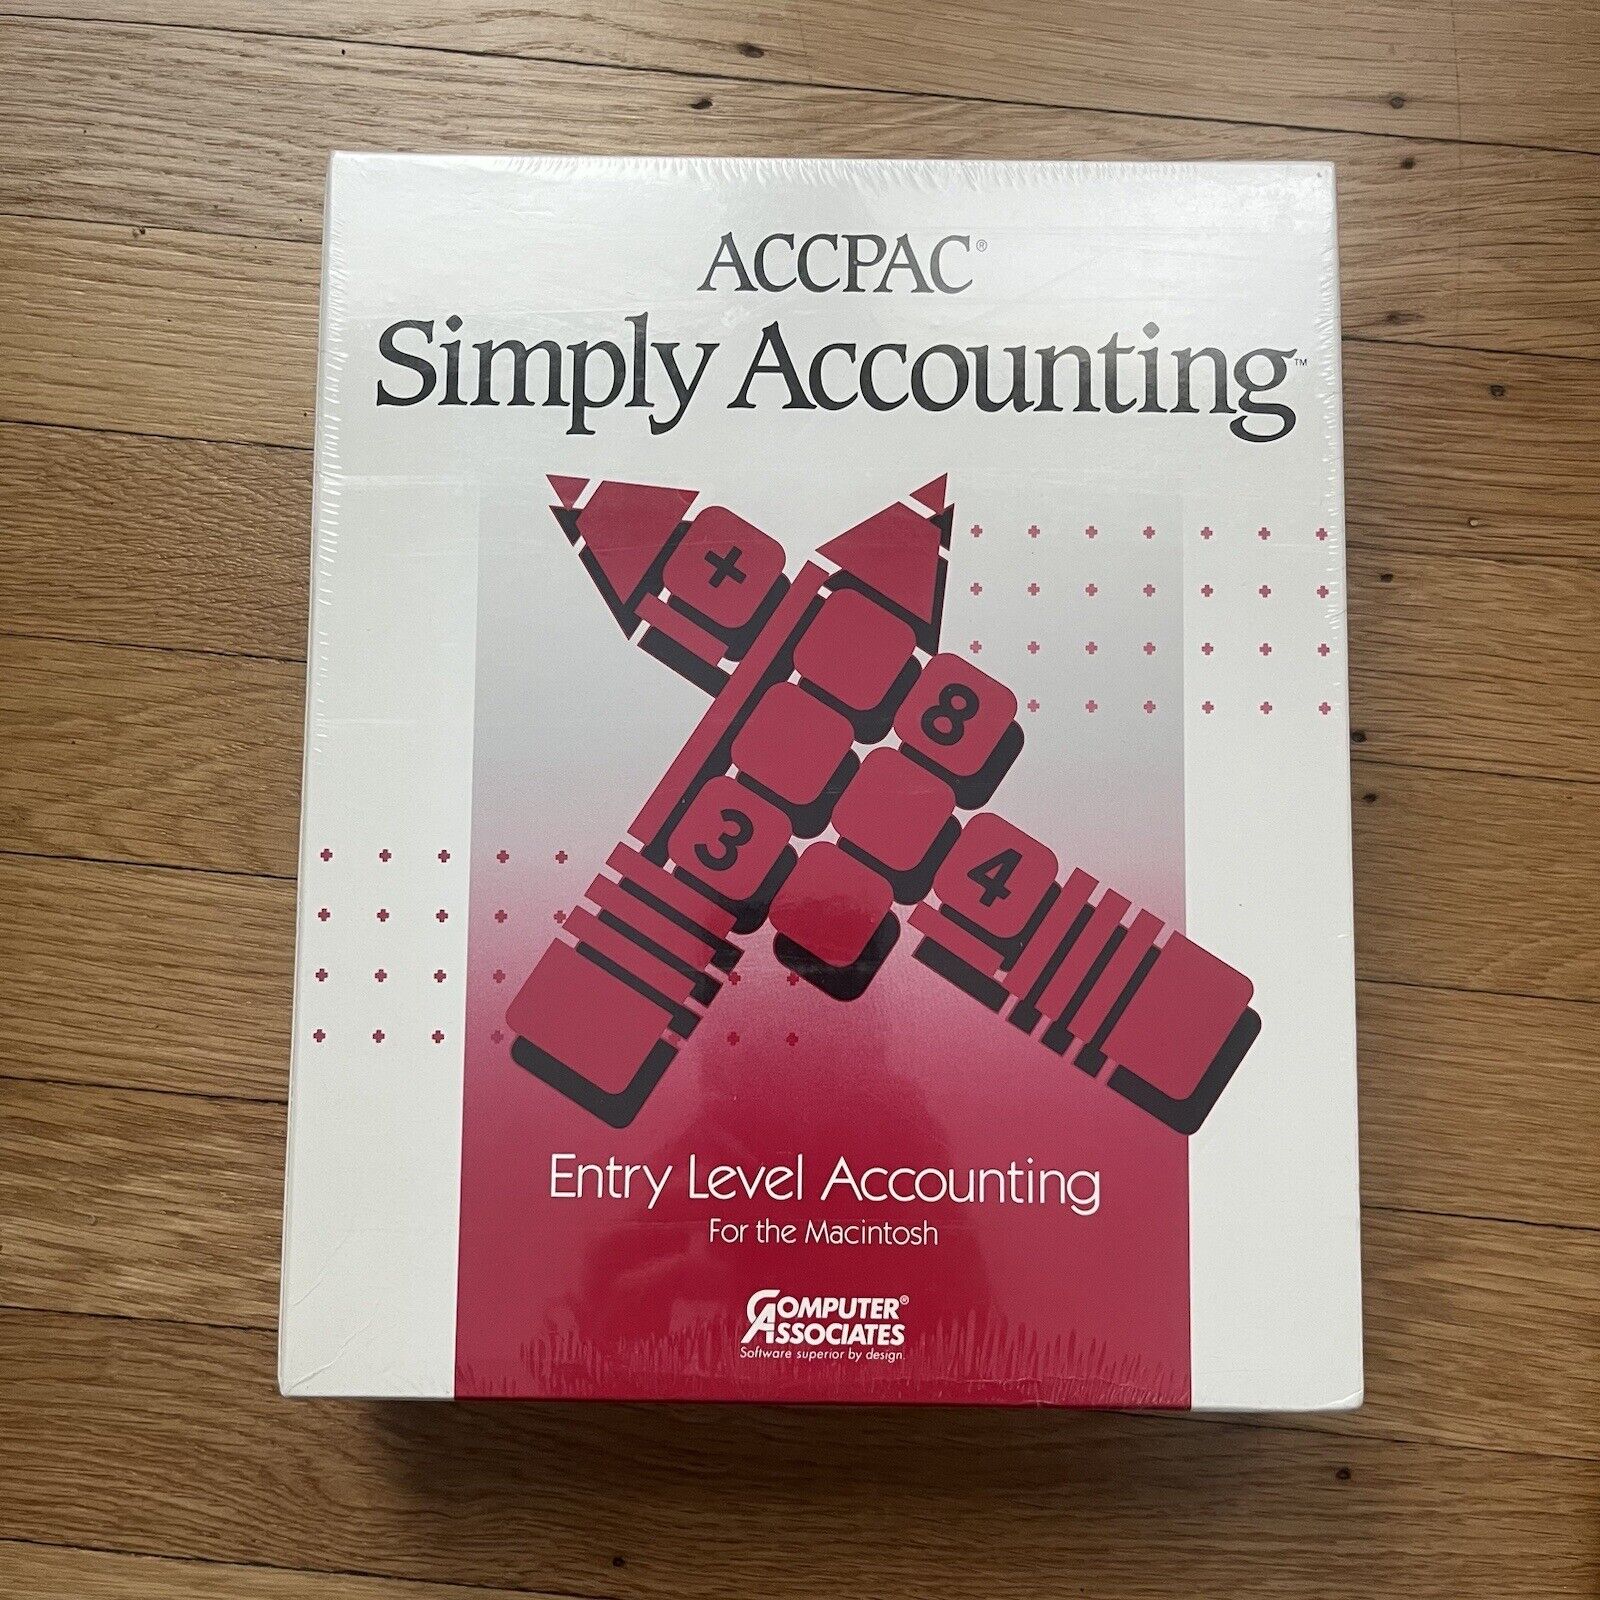 ACCPAC Simply Accounting for Macintosh Mac Apple Computer Associates 1991 SEALED